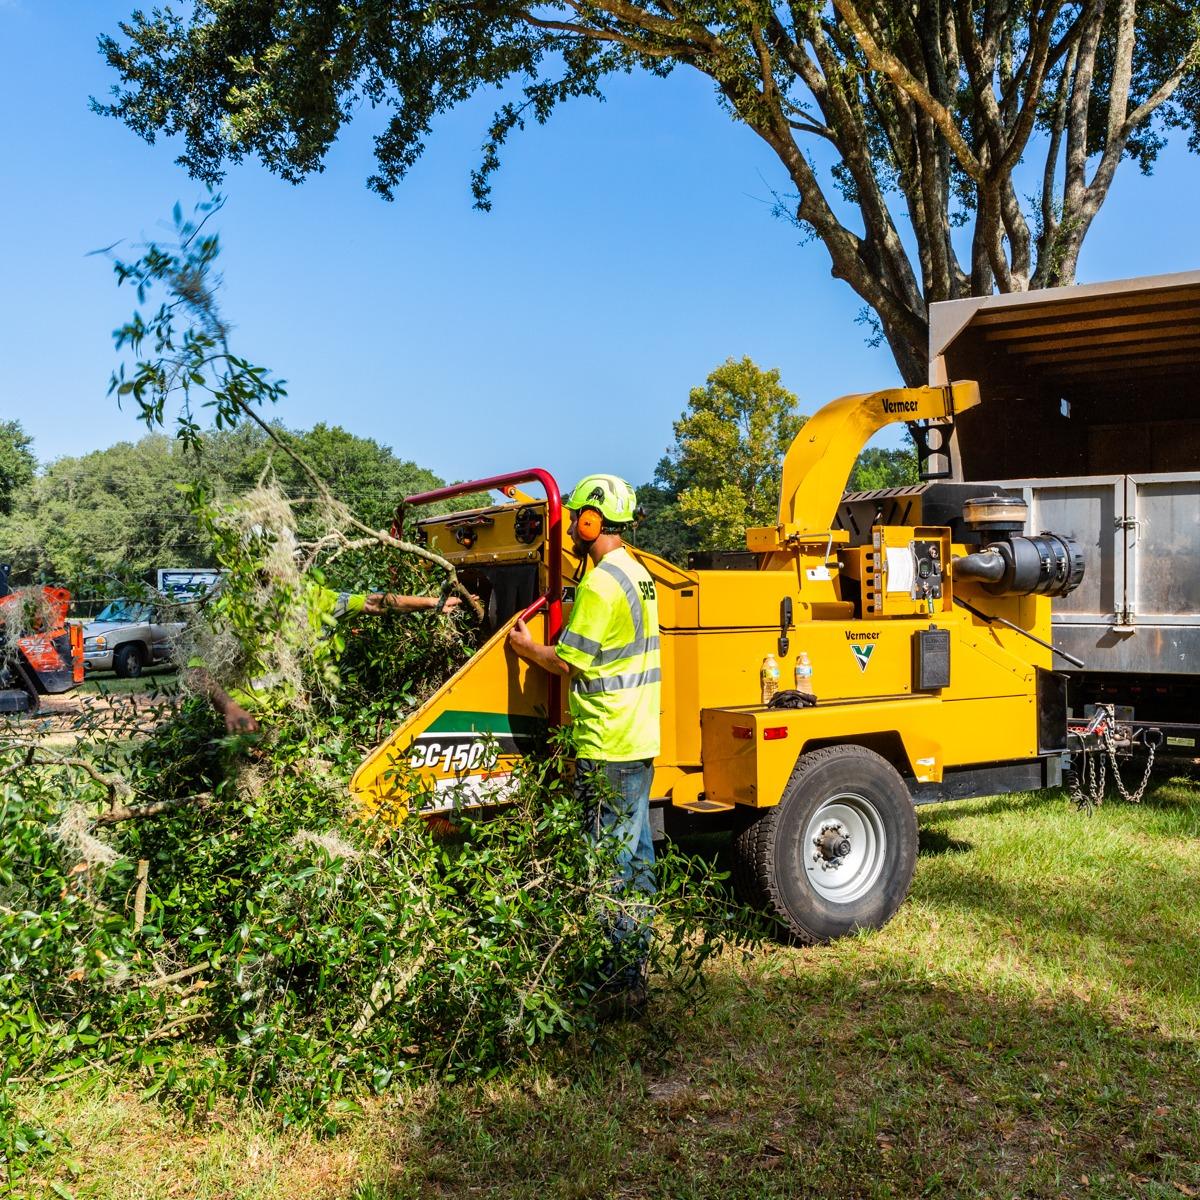 Brush Removal & Wood Chipping Service Gainesville